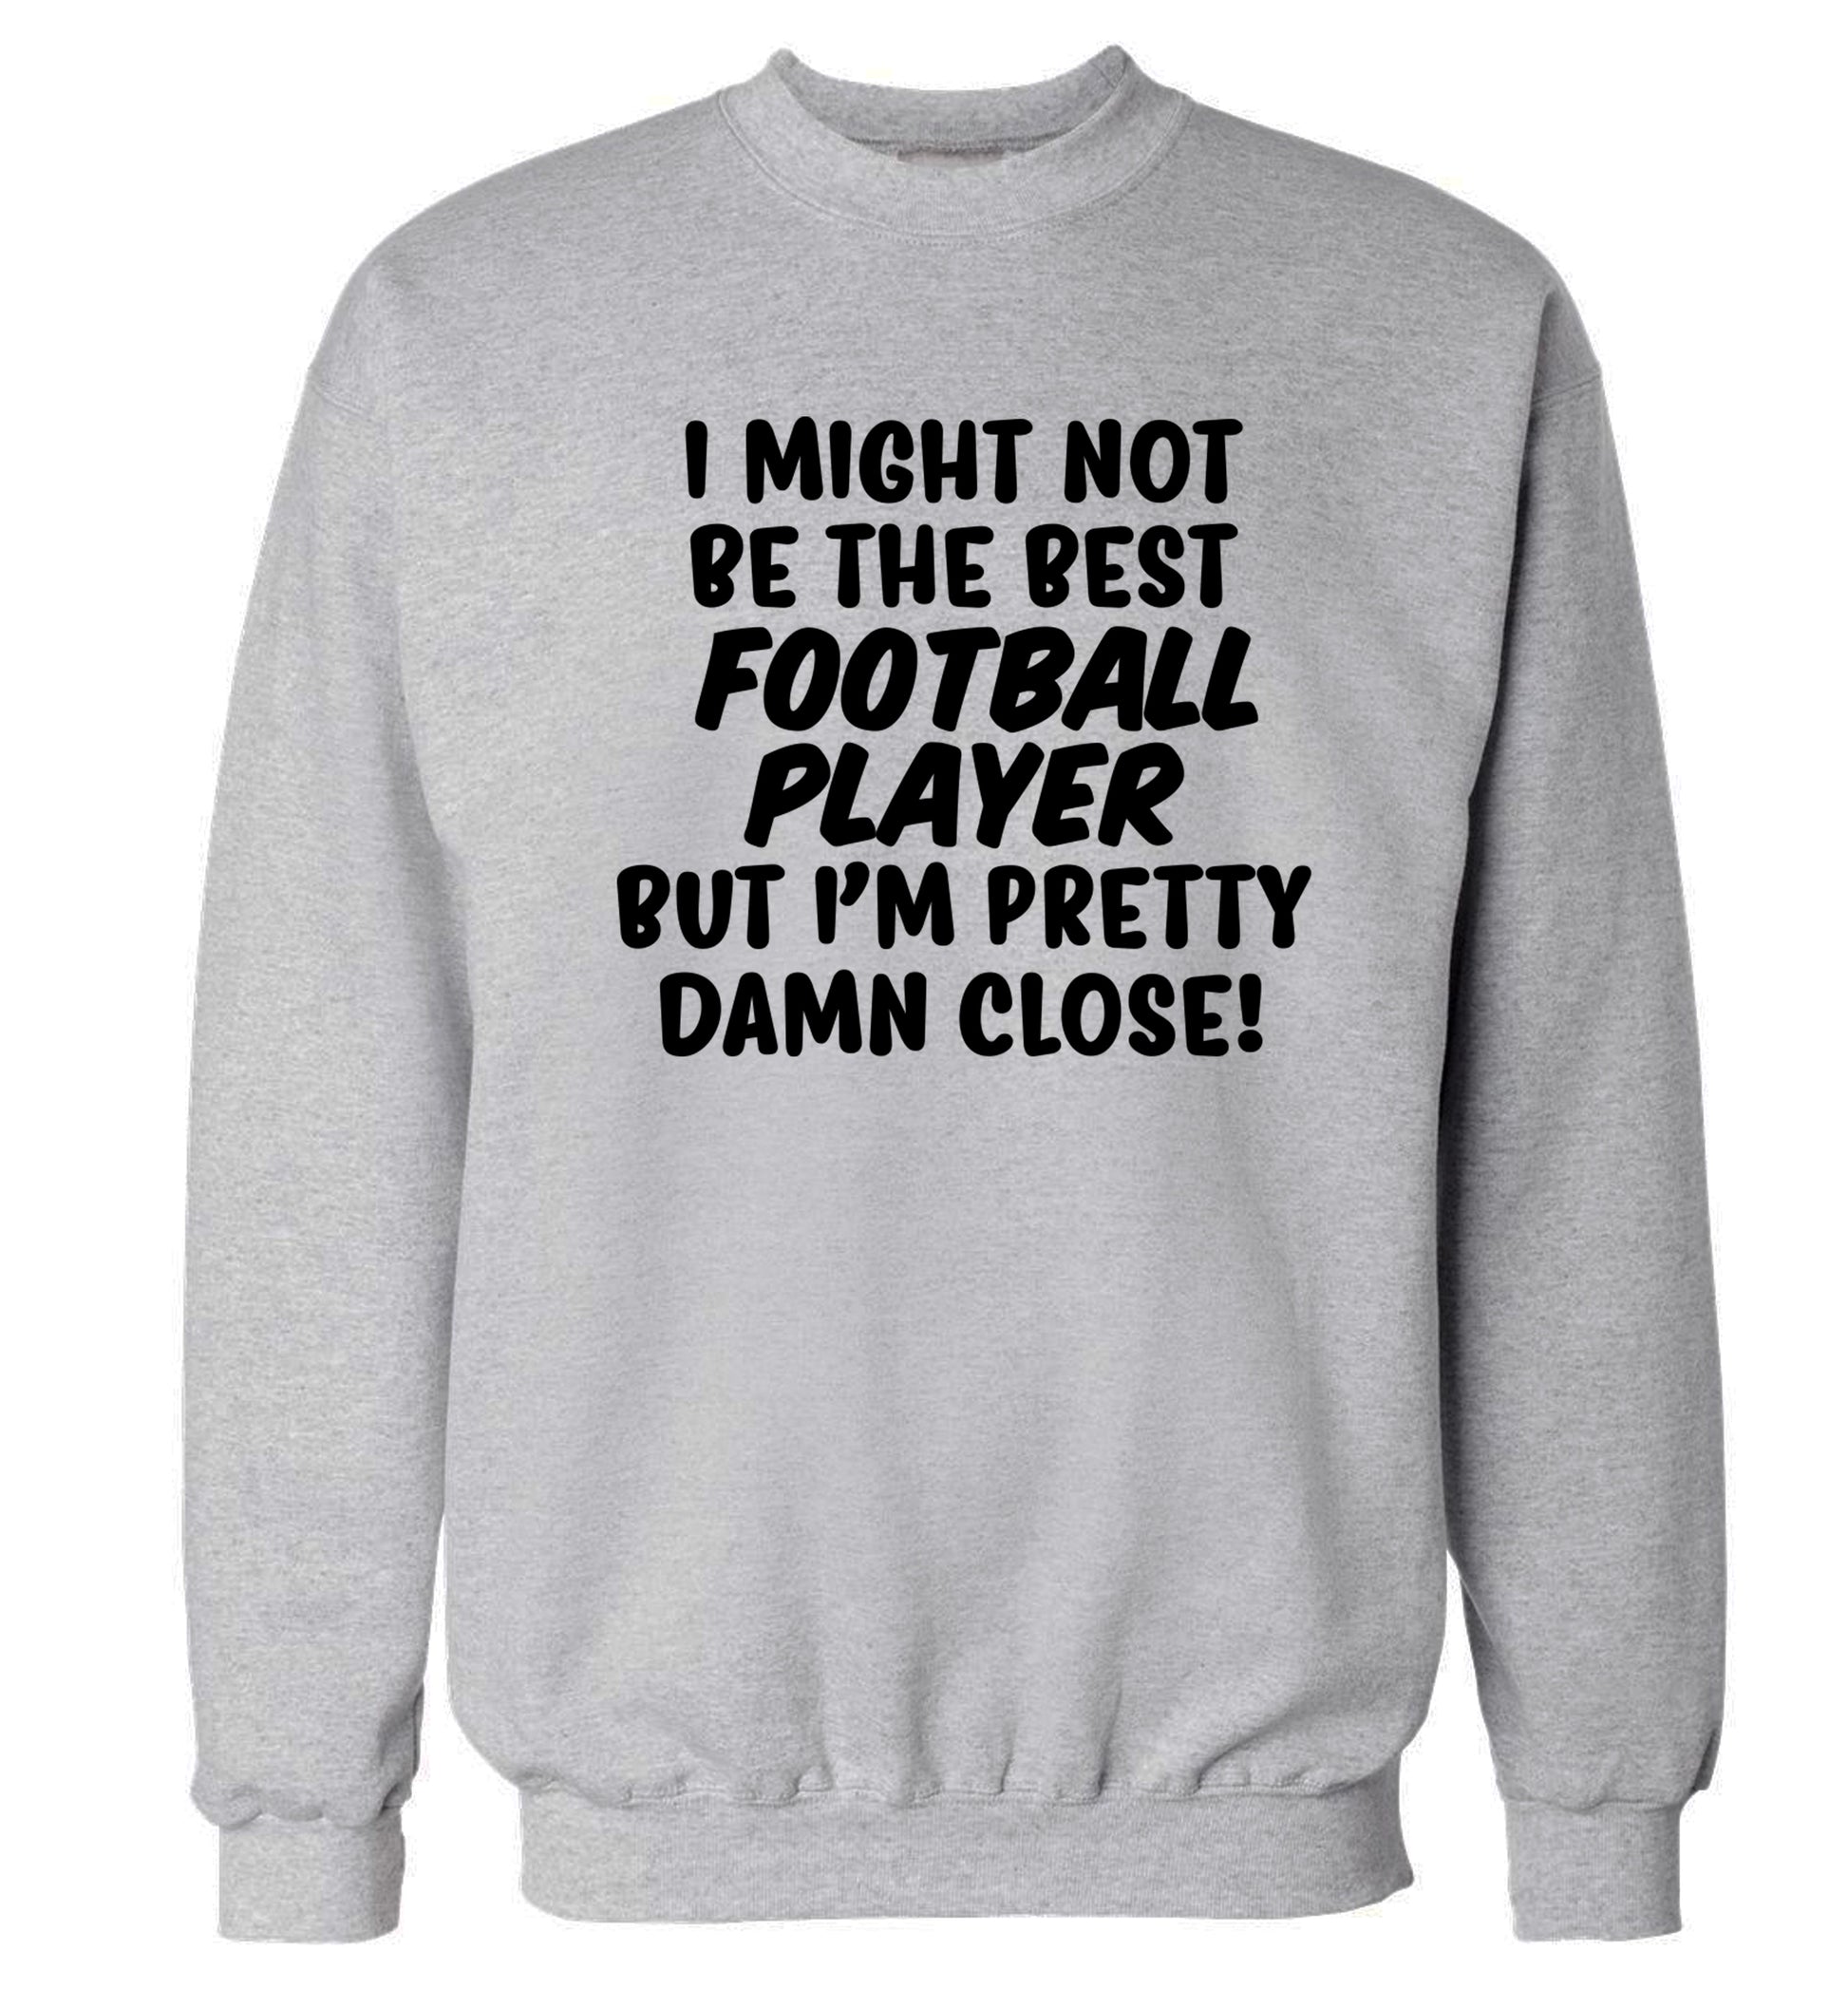 I might not be the best football player but I'm pretty close! Adult's unisexgrey Sweater 2XL